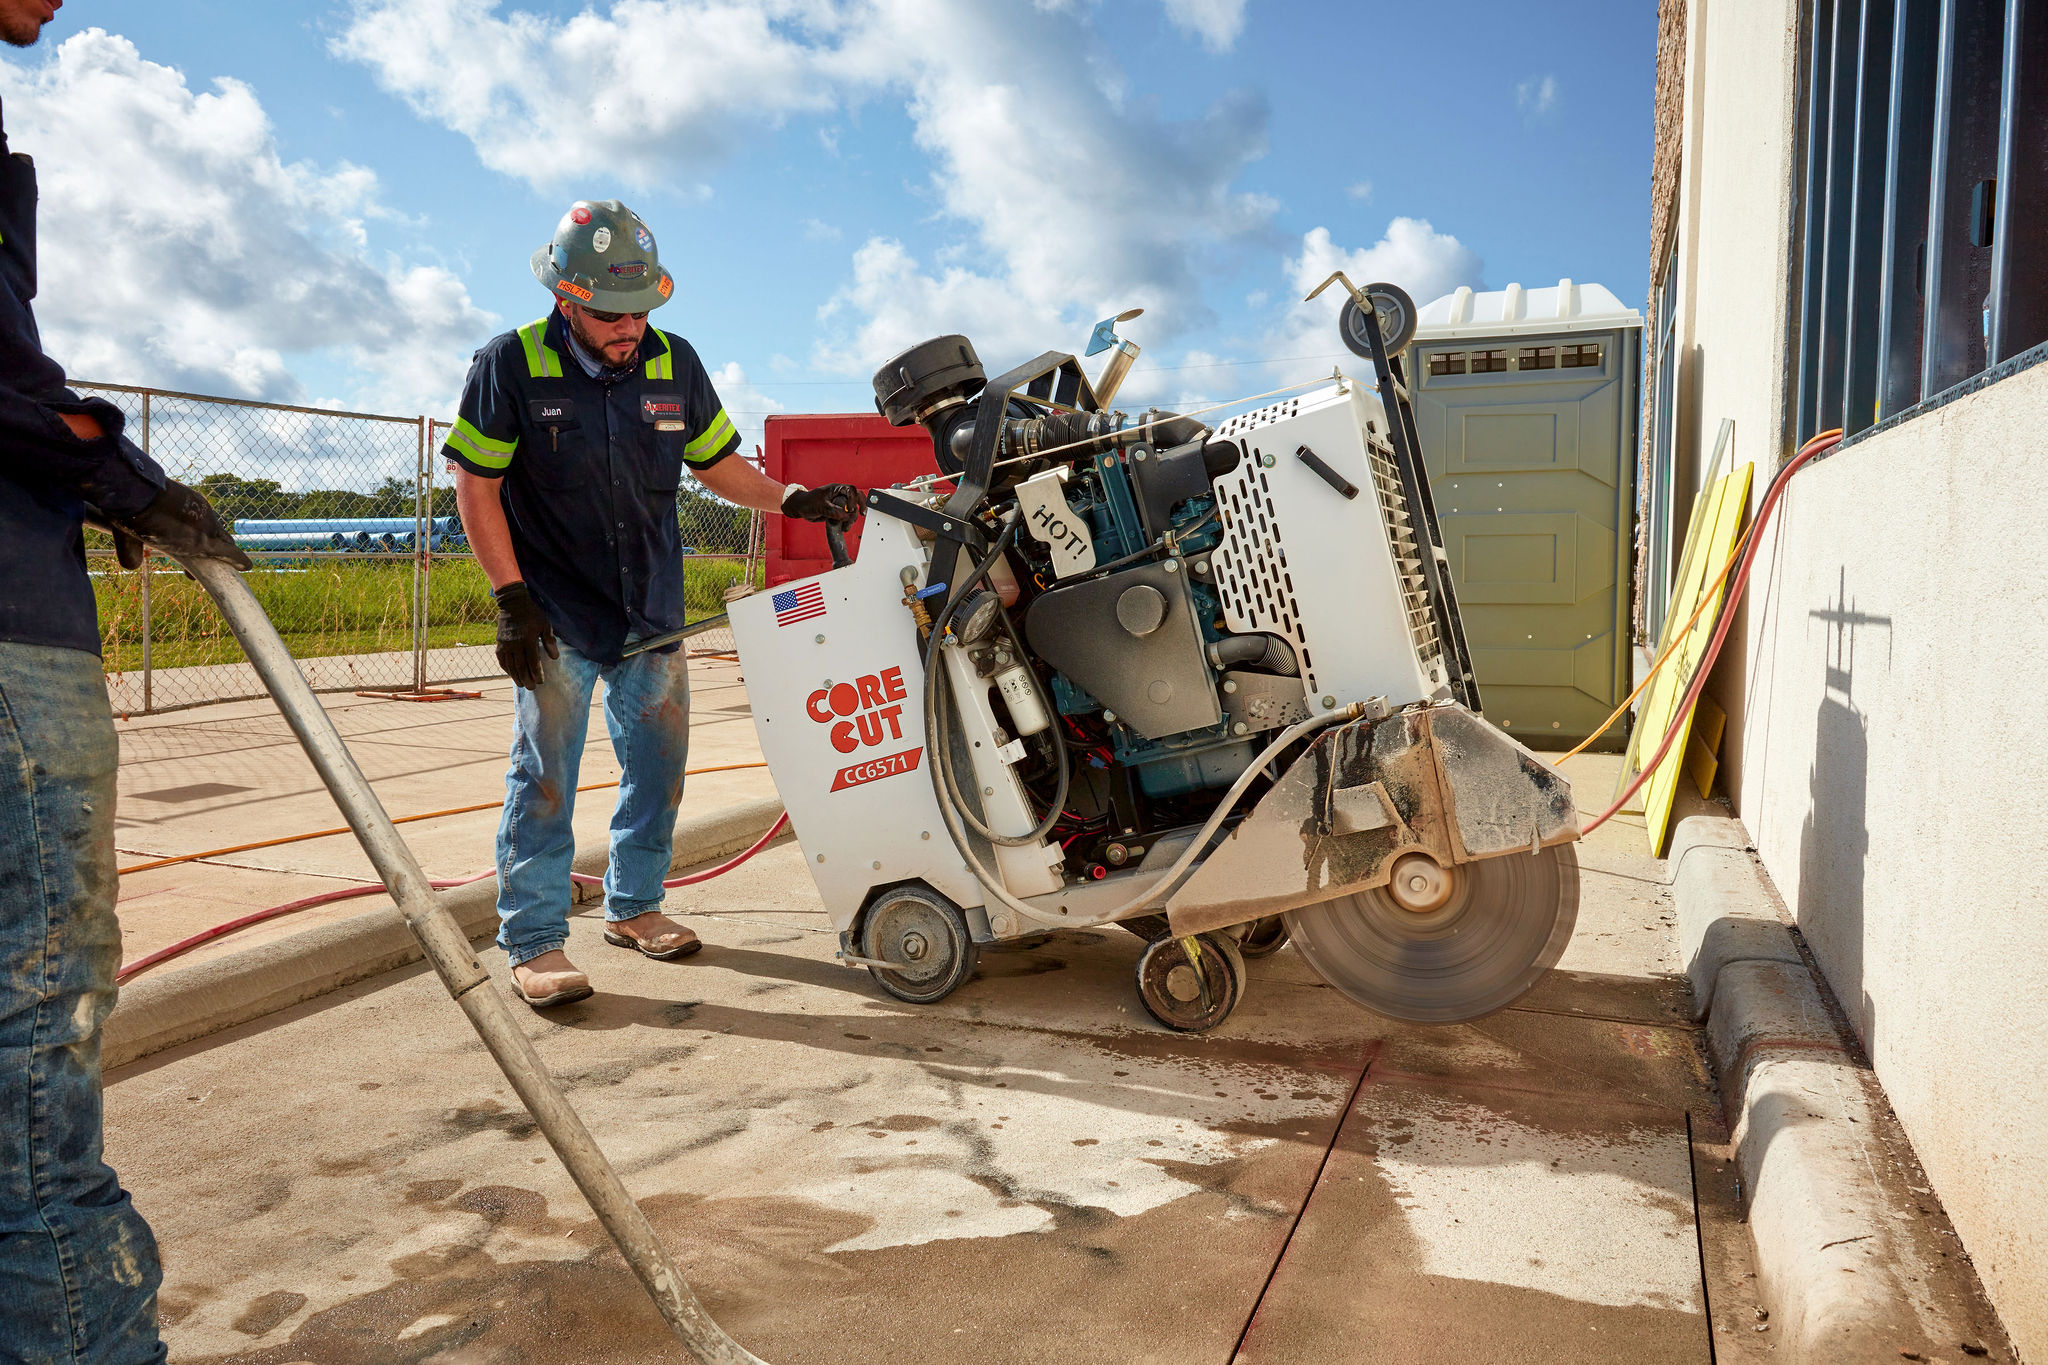 Parking lot removal requires concrete sawing. Concrete cutting creates a clean edge so that new concrete can be poured.